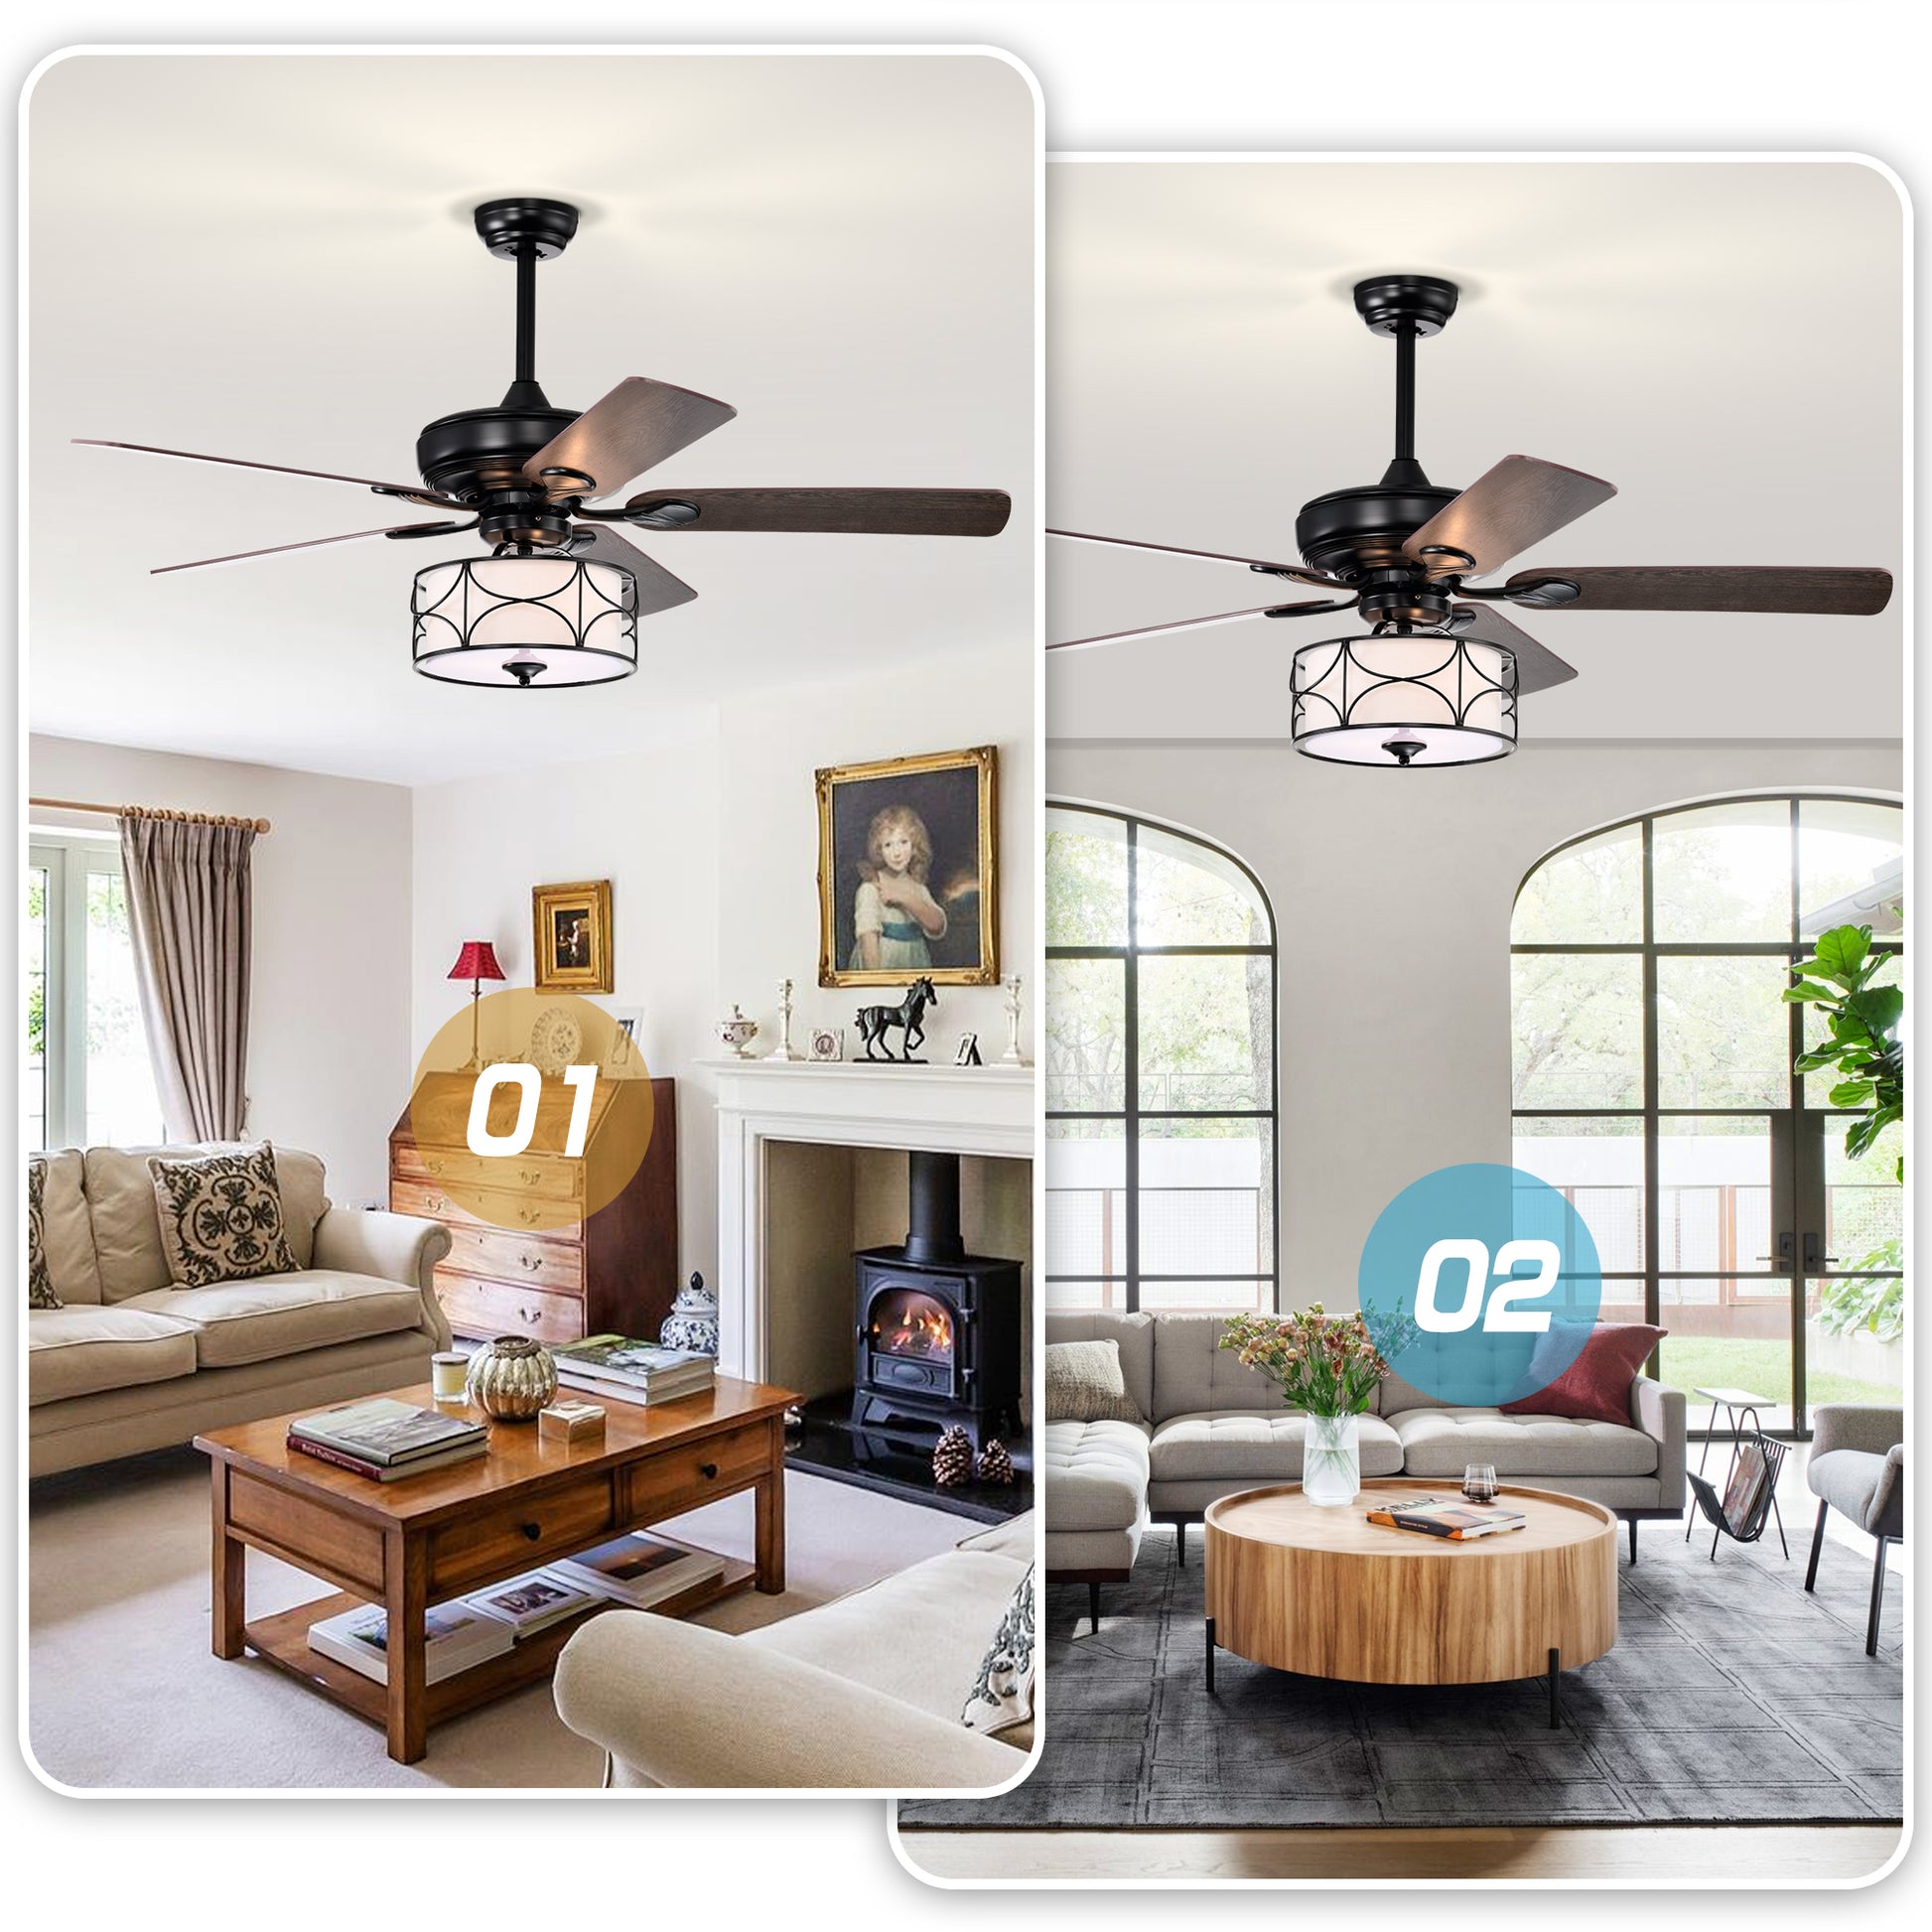 52 Inch Modern Ceiling Fan with Dual Finish